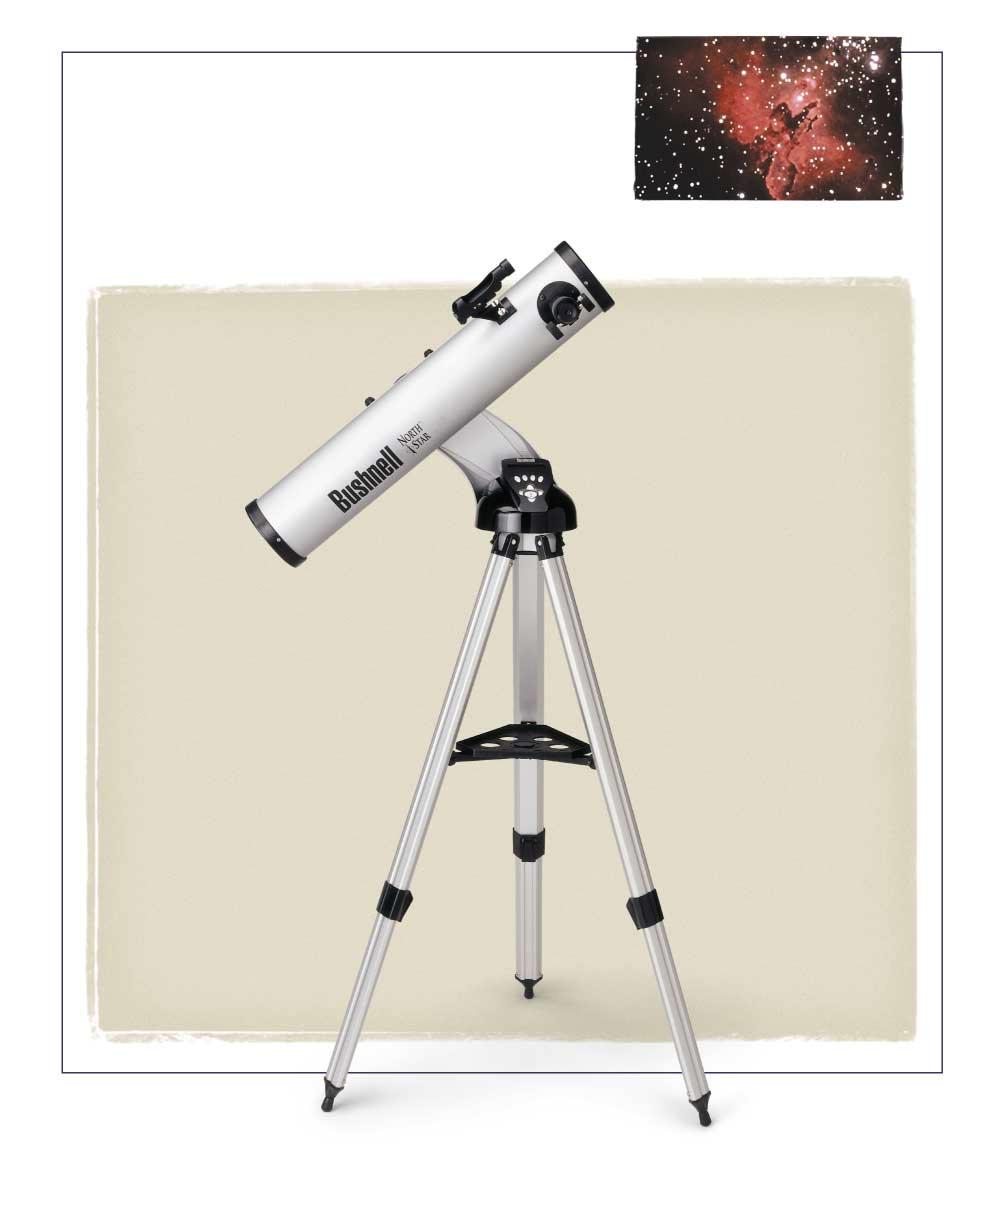 78-8830 Mount: Kinematic 675 x 4.5" NEW 525 x 3" w/rvo A talking high-power, reflector telescope. Up to 525x magnification and 3-inch reflector mirror.